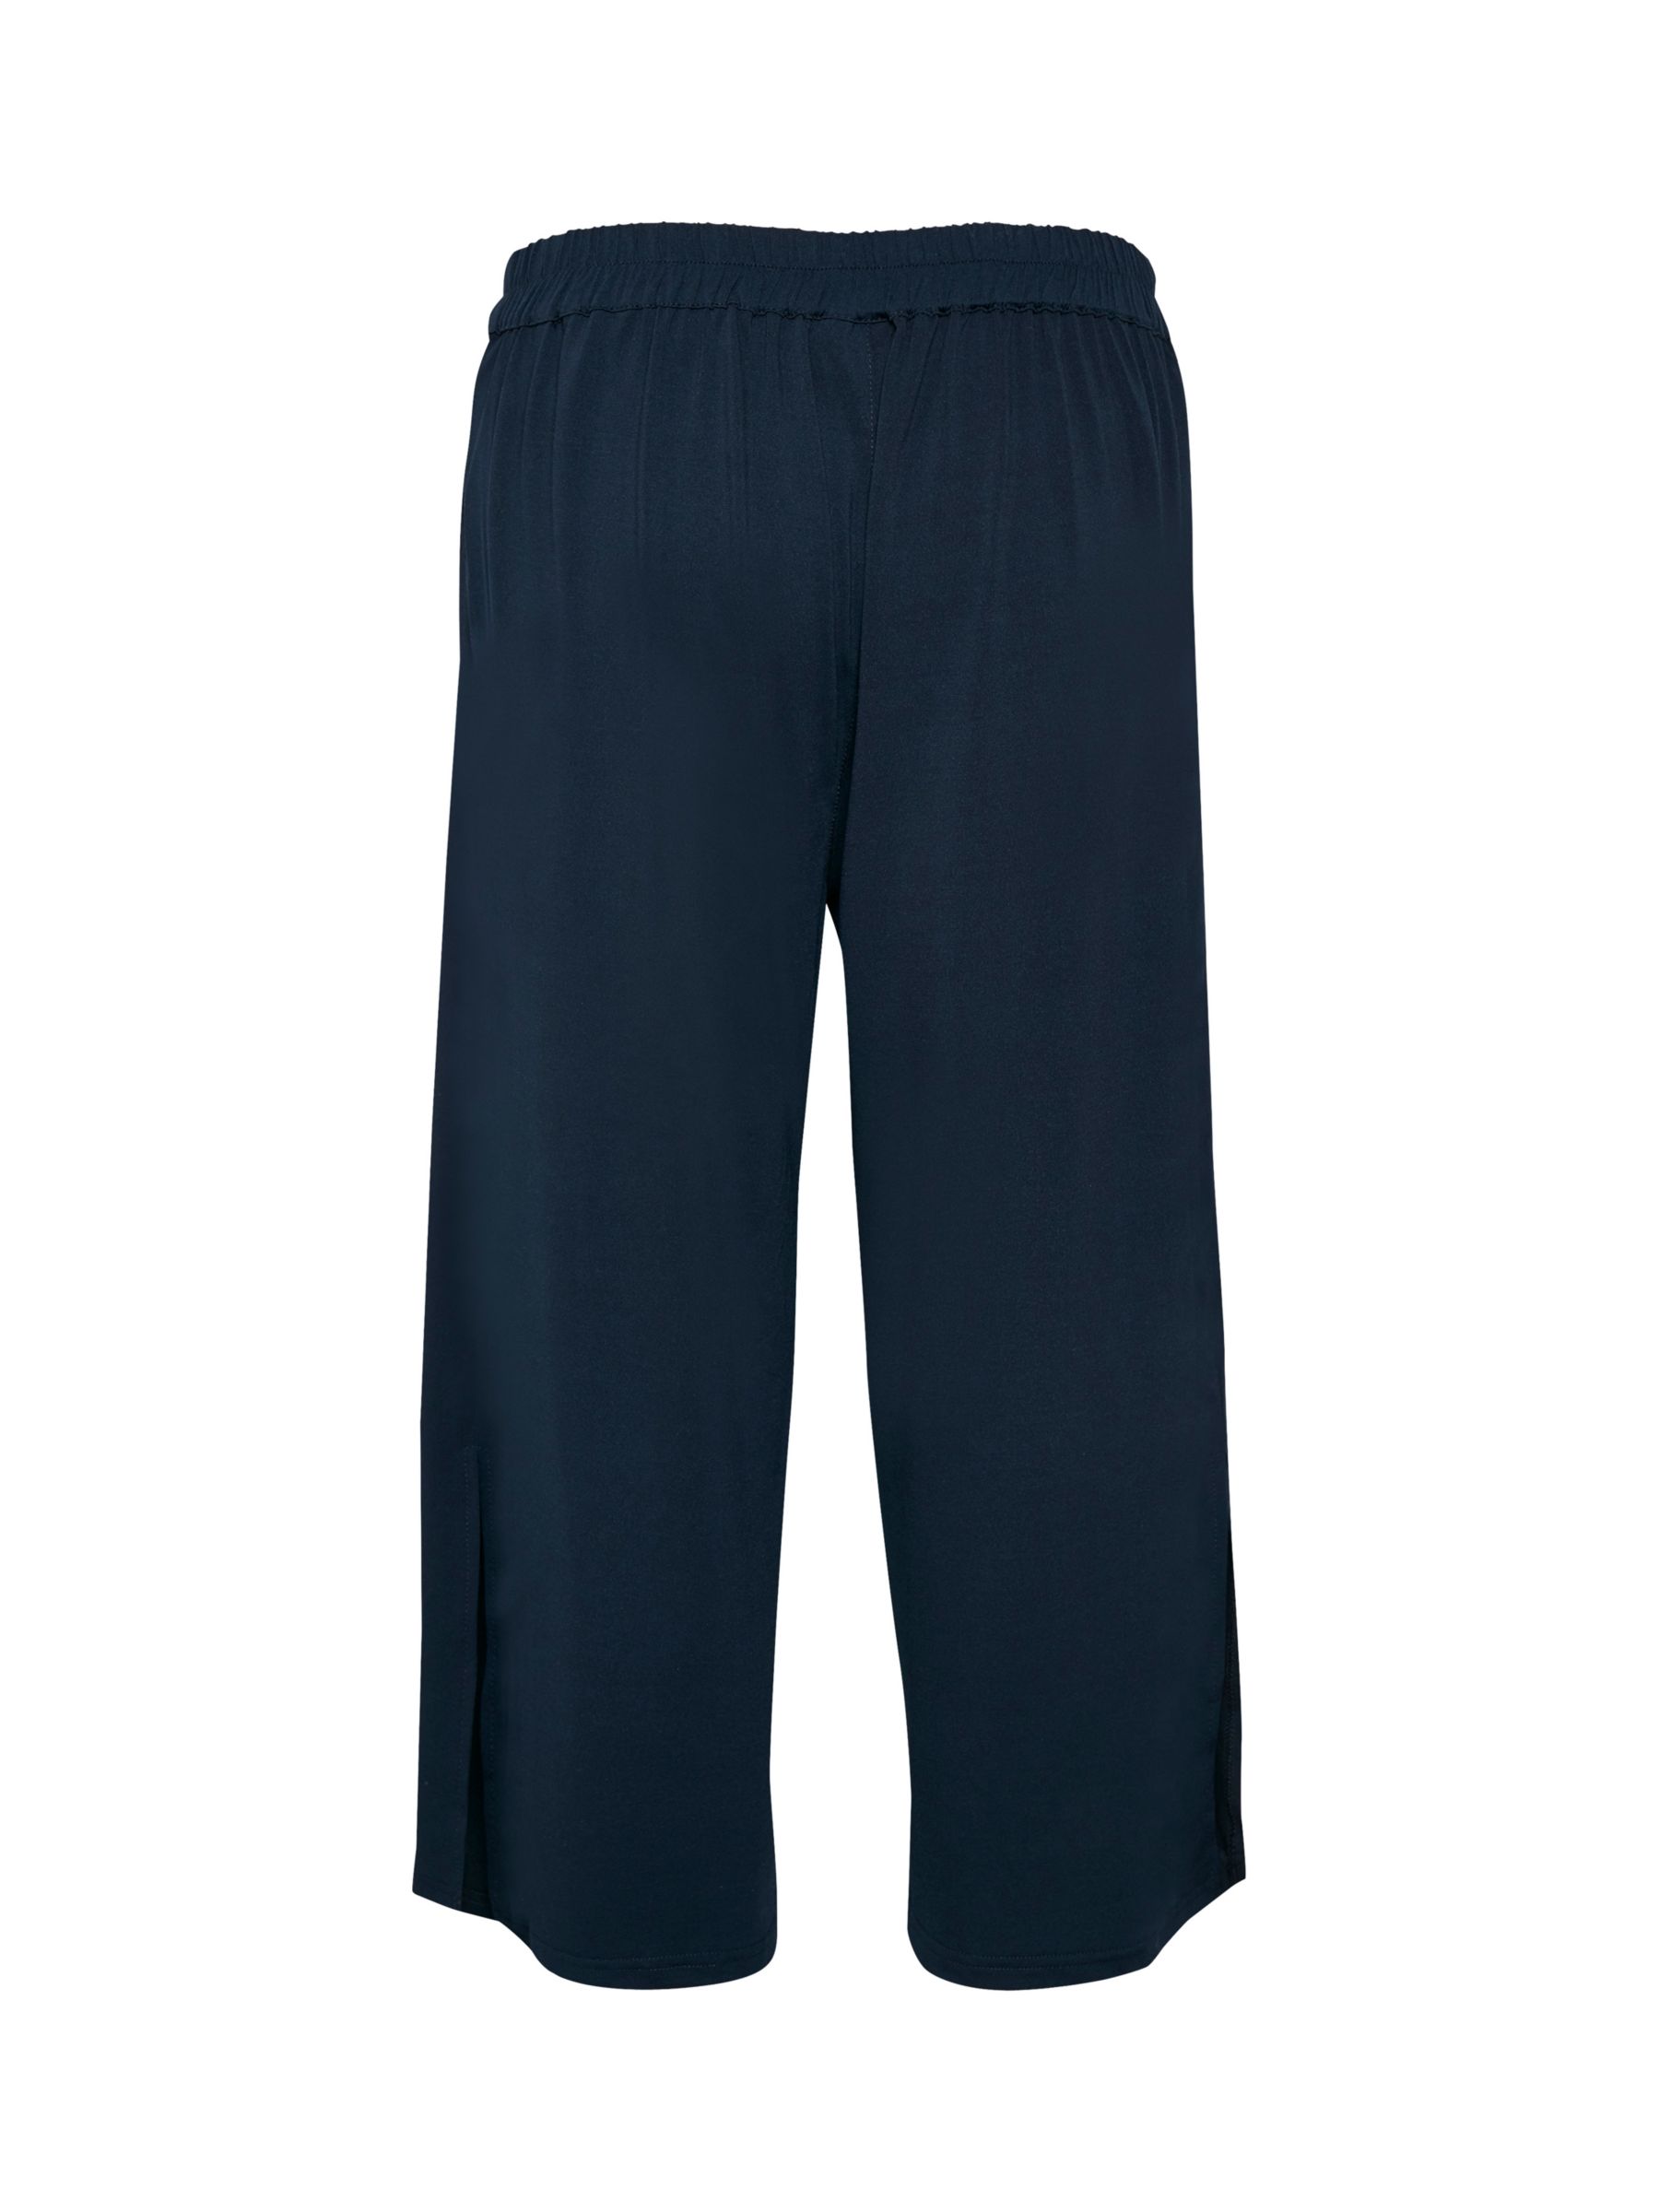 Buy KAFFE Malli Cropped Casual Trousers, Midnight Marine Online at johnlewis.com